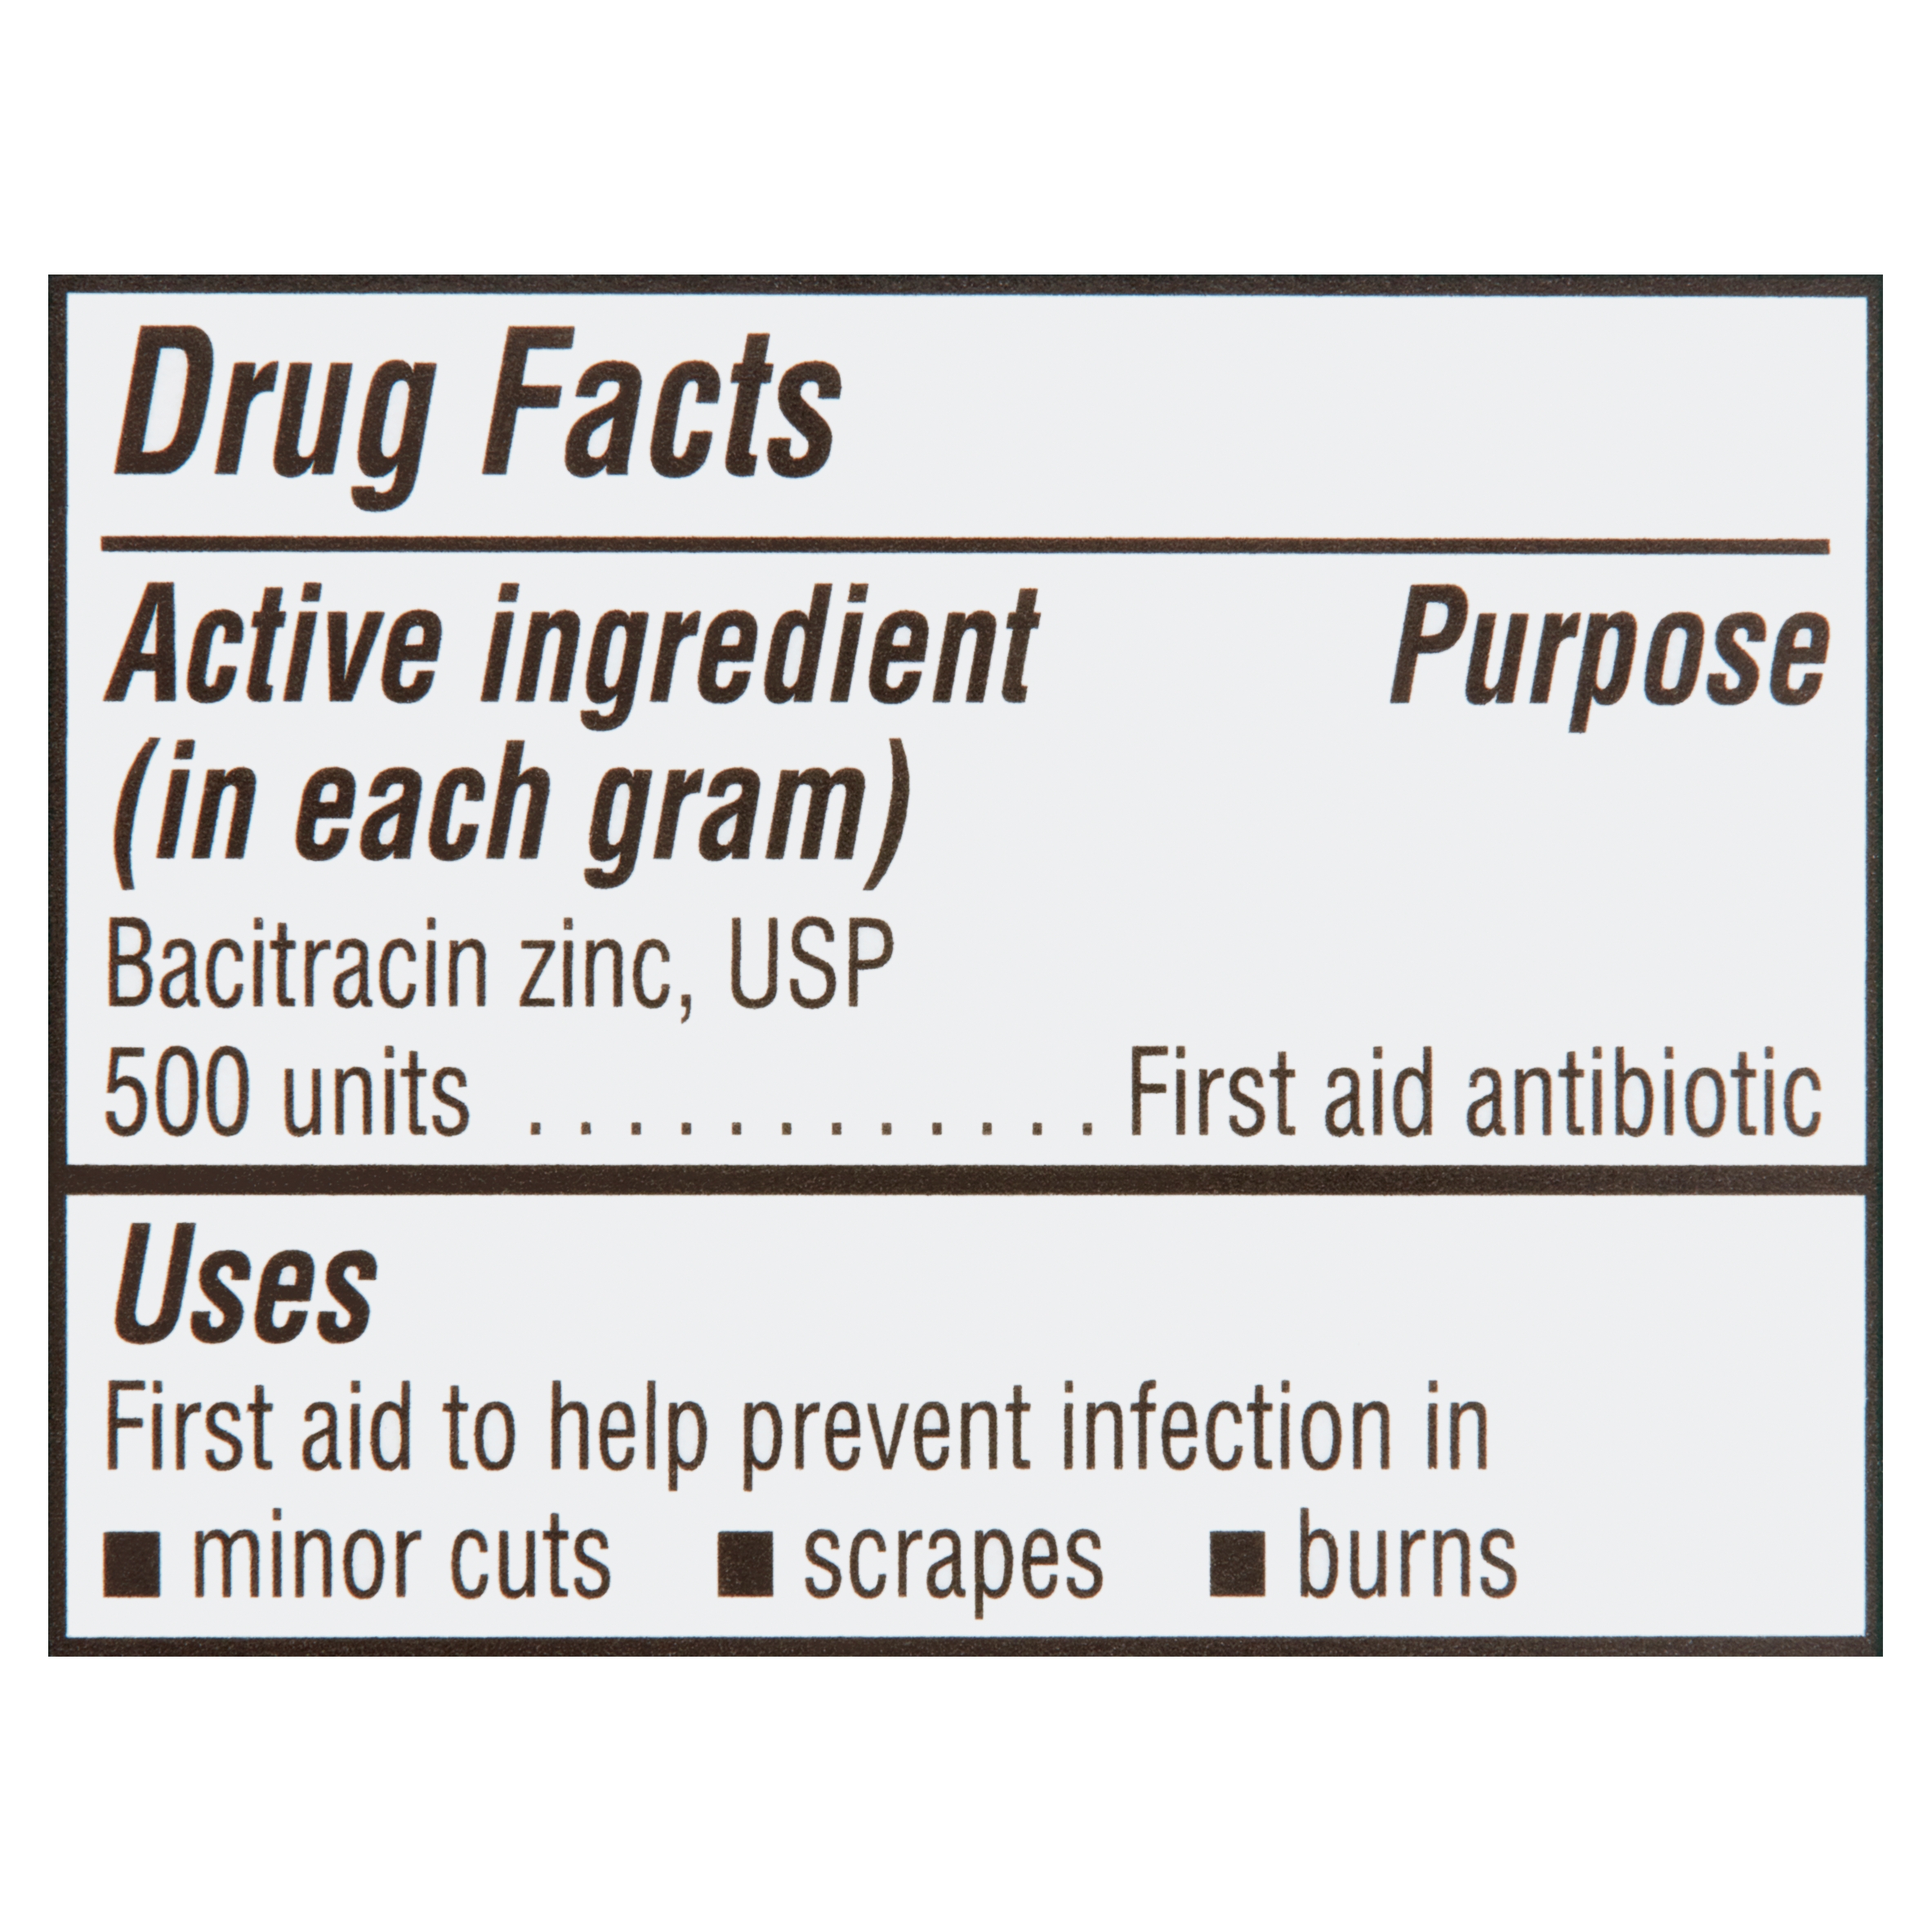 Equate Bacitracin Zinc USP Ointment, First Aid Antibiotic, 1 oz - image 4 of 8